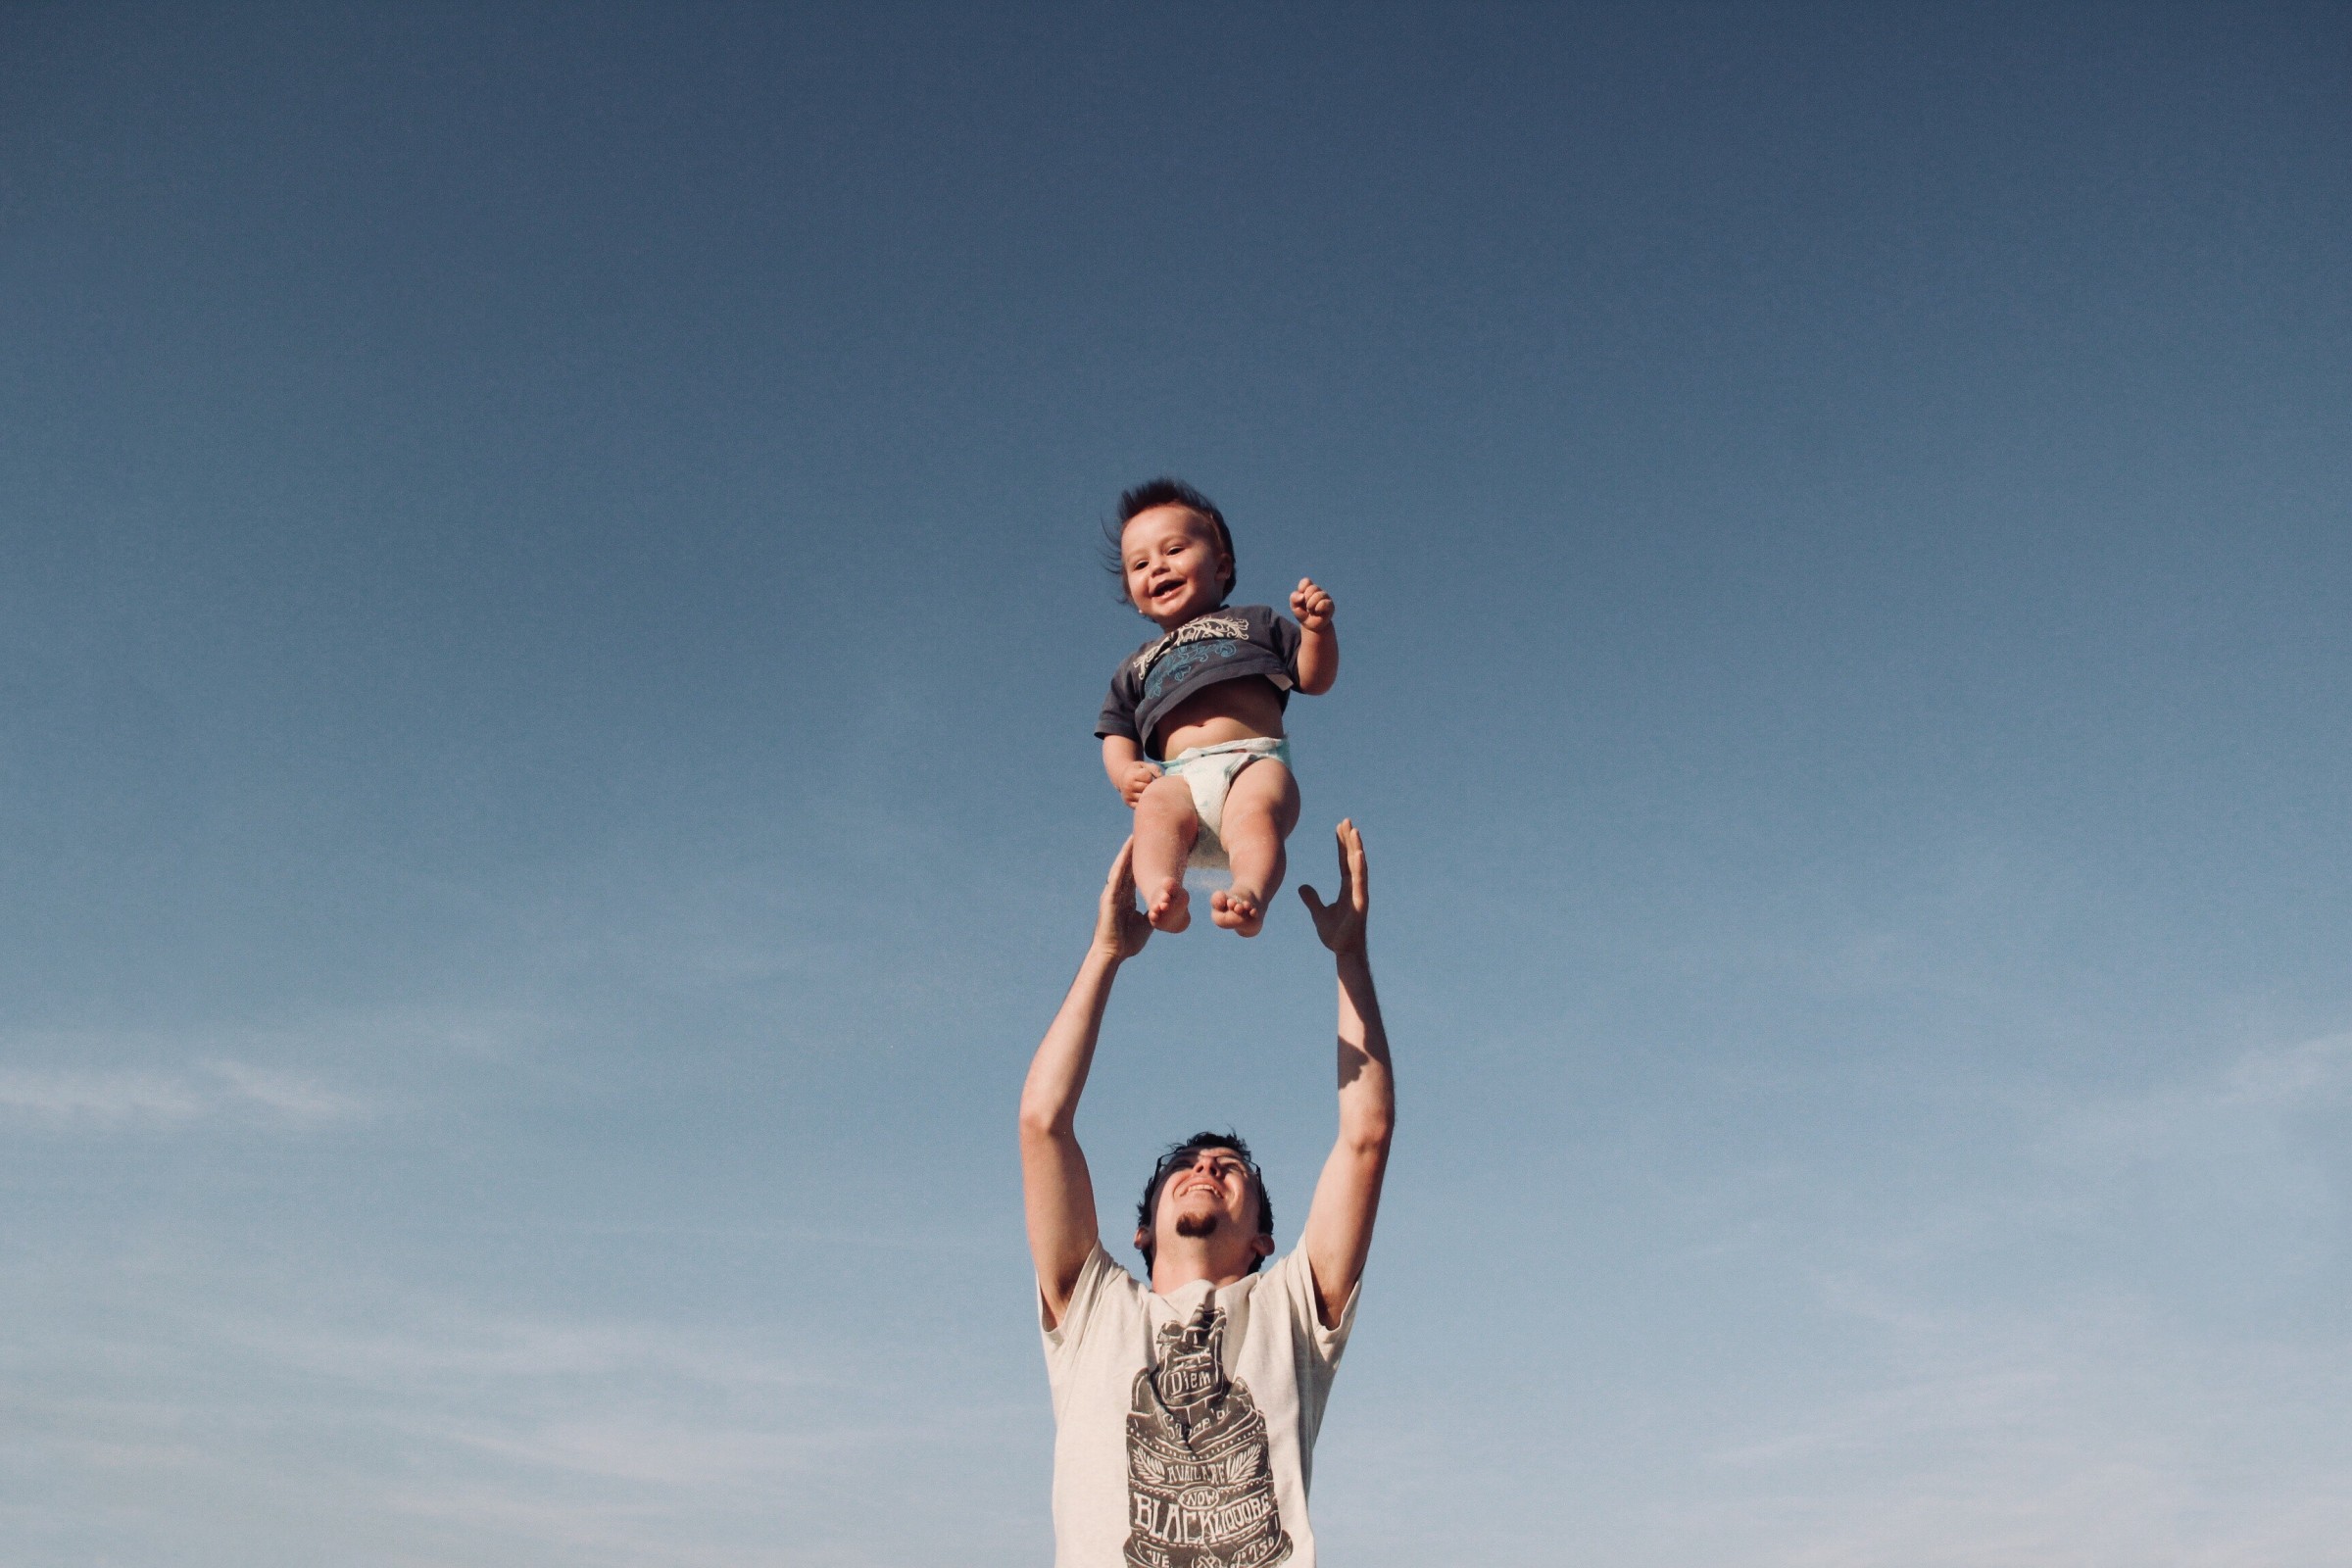 Father tossing up child in the air and smiling.